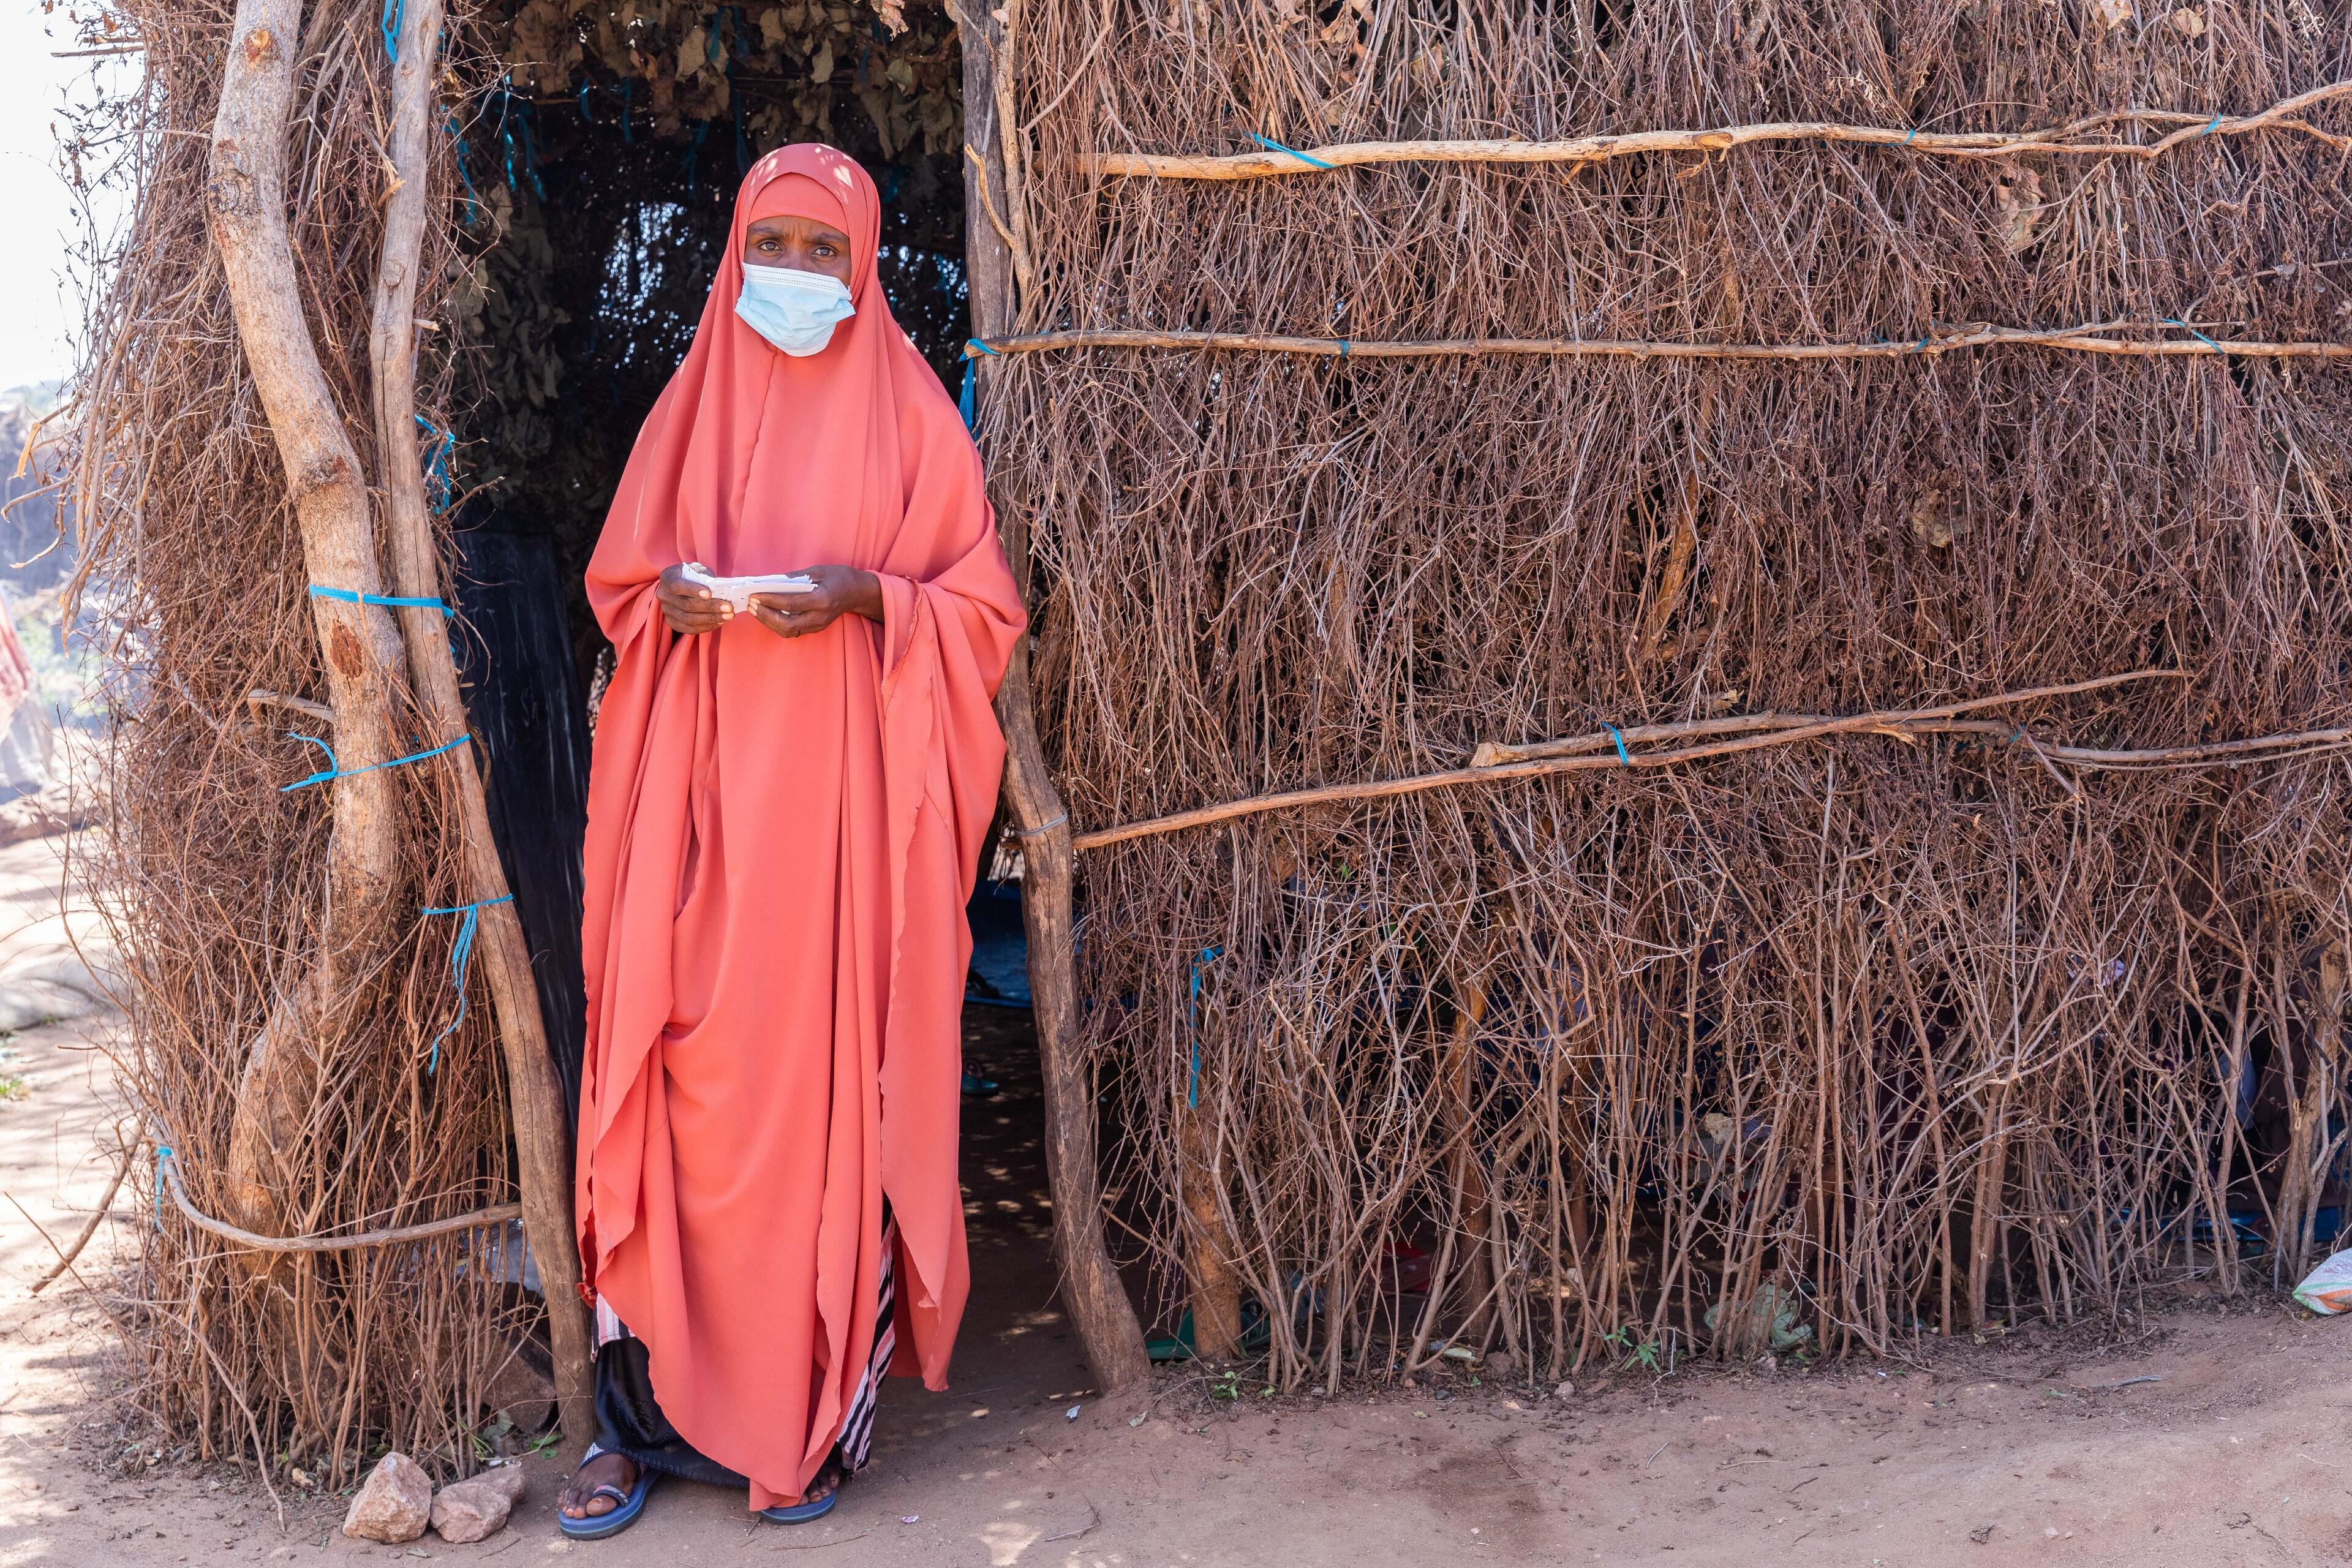 A teacher wearing a mask to protect against the spread of COVID-19 stands outside her makeshift classroom fashioned from branches in a displacmeent camp in Ethiopia.